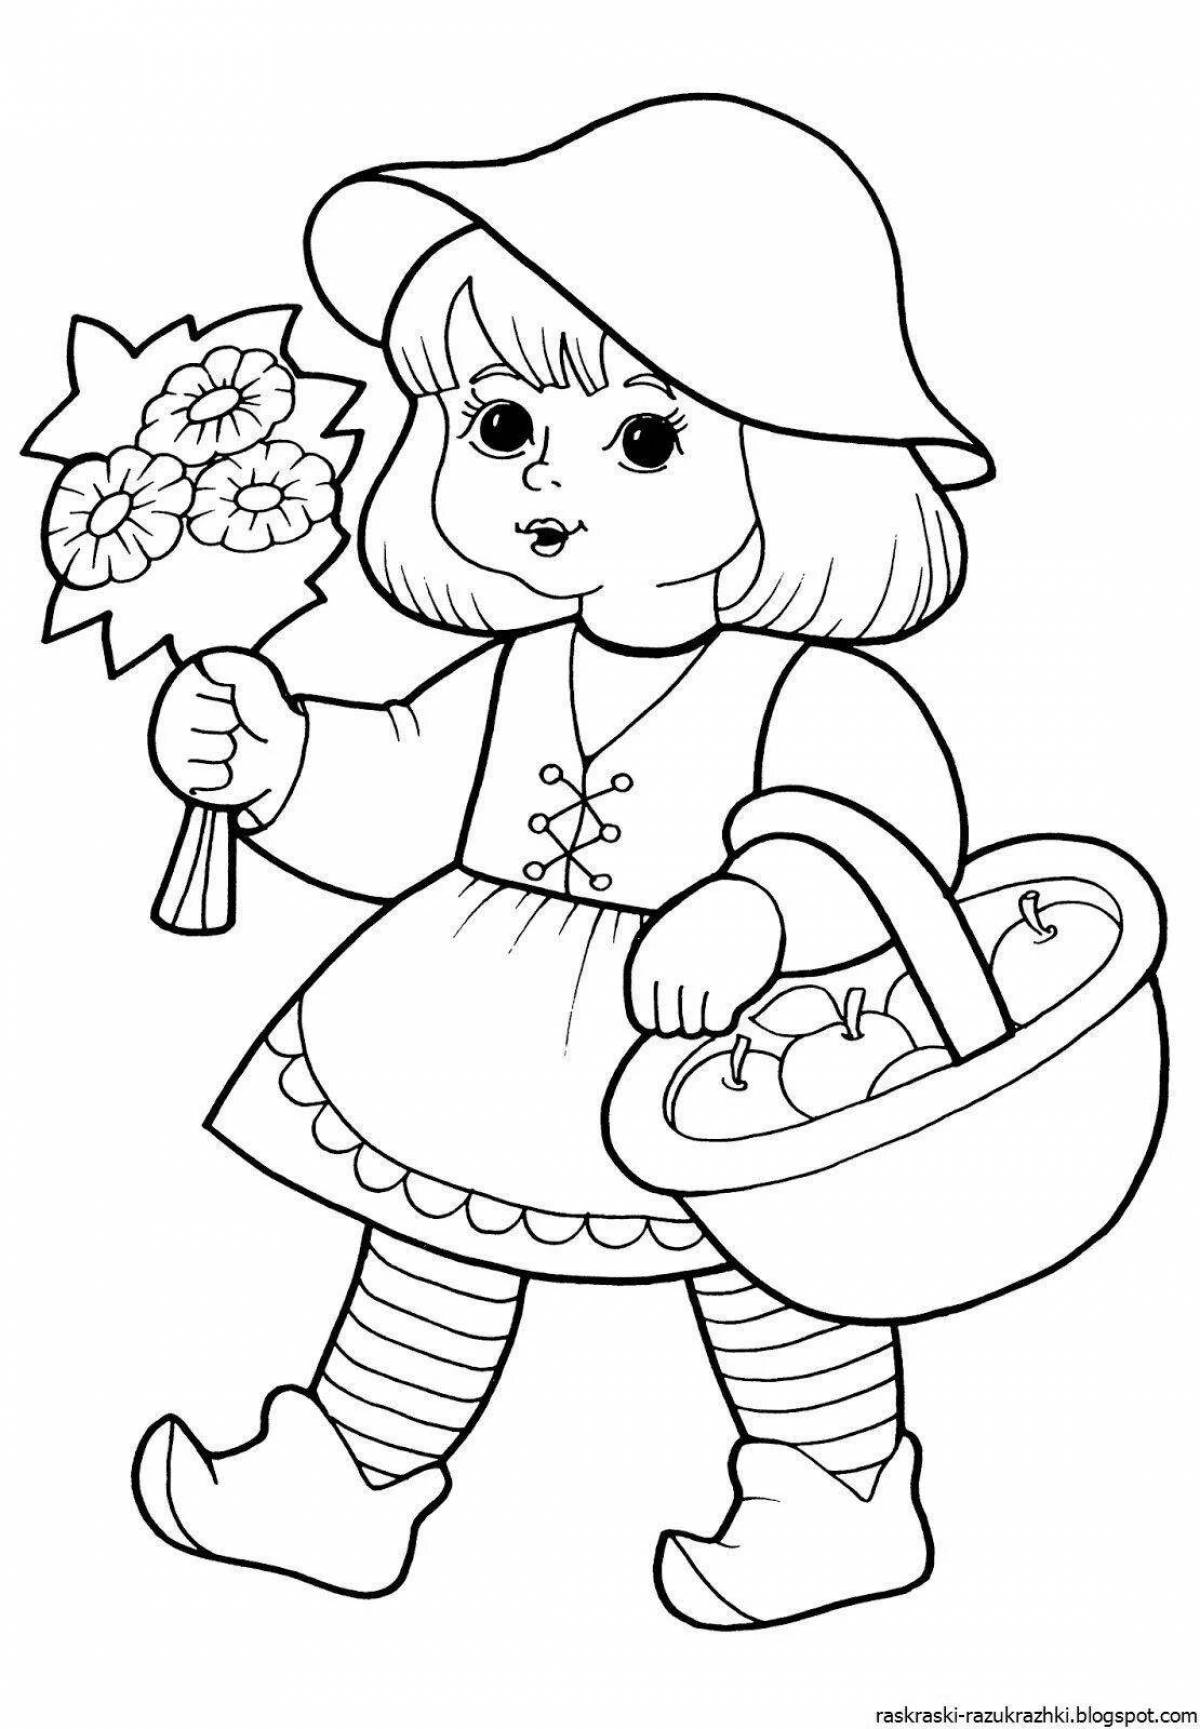 Shining fairy tale coloring book senior group